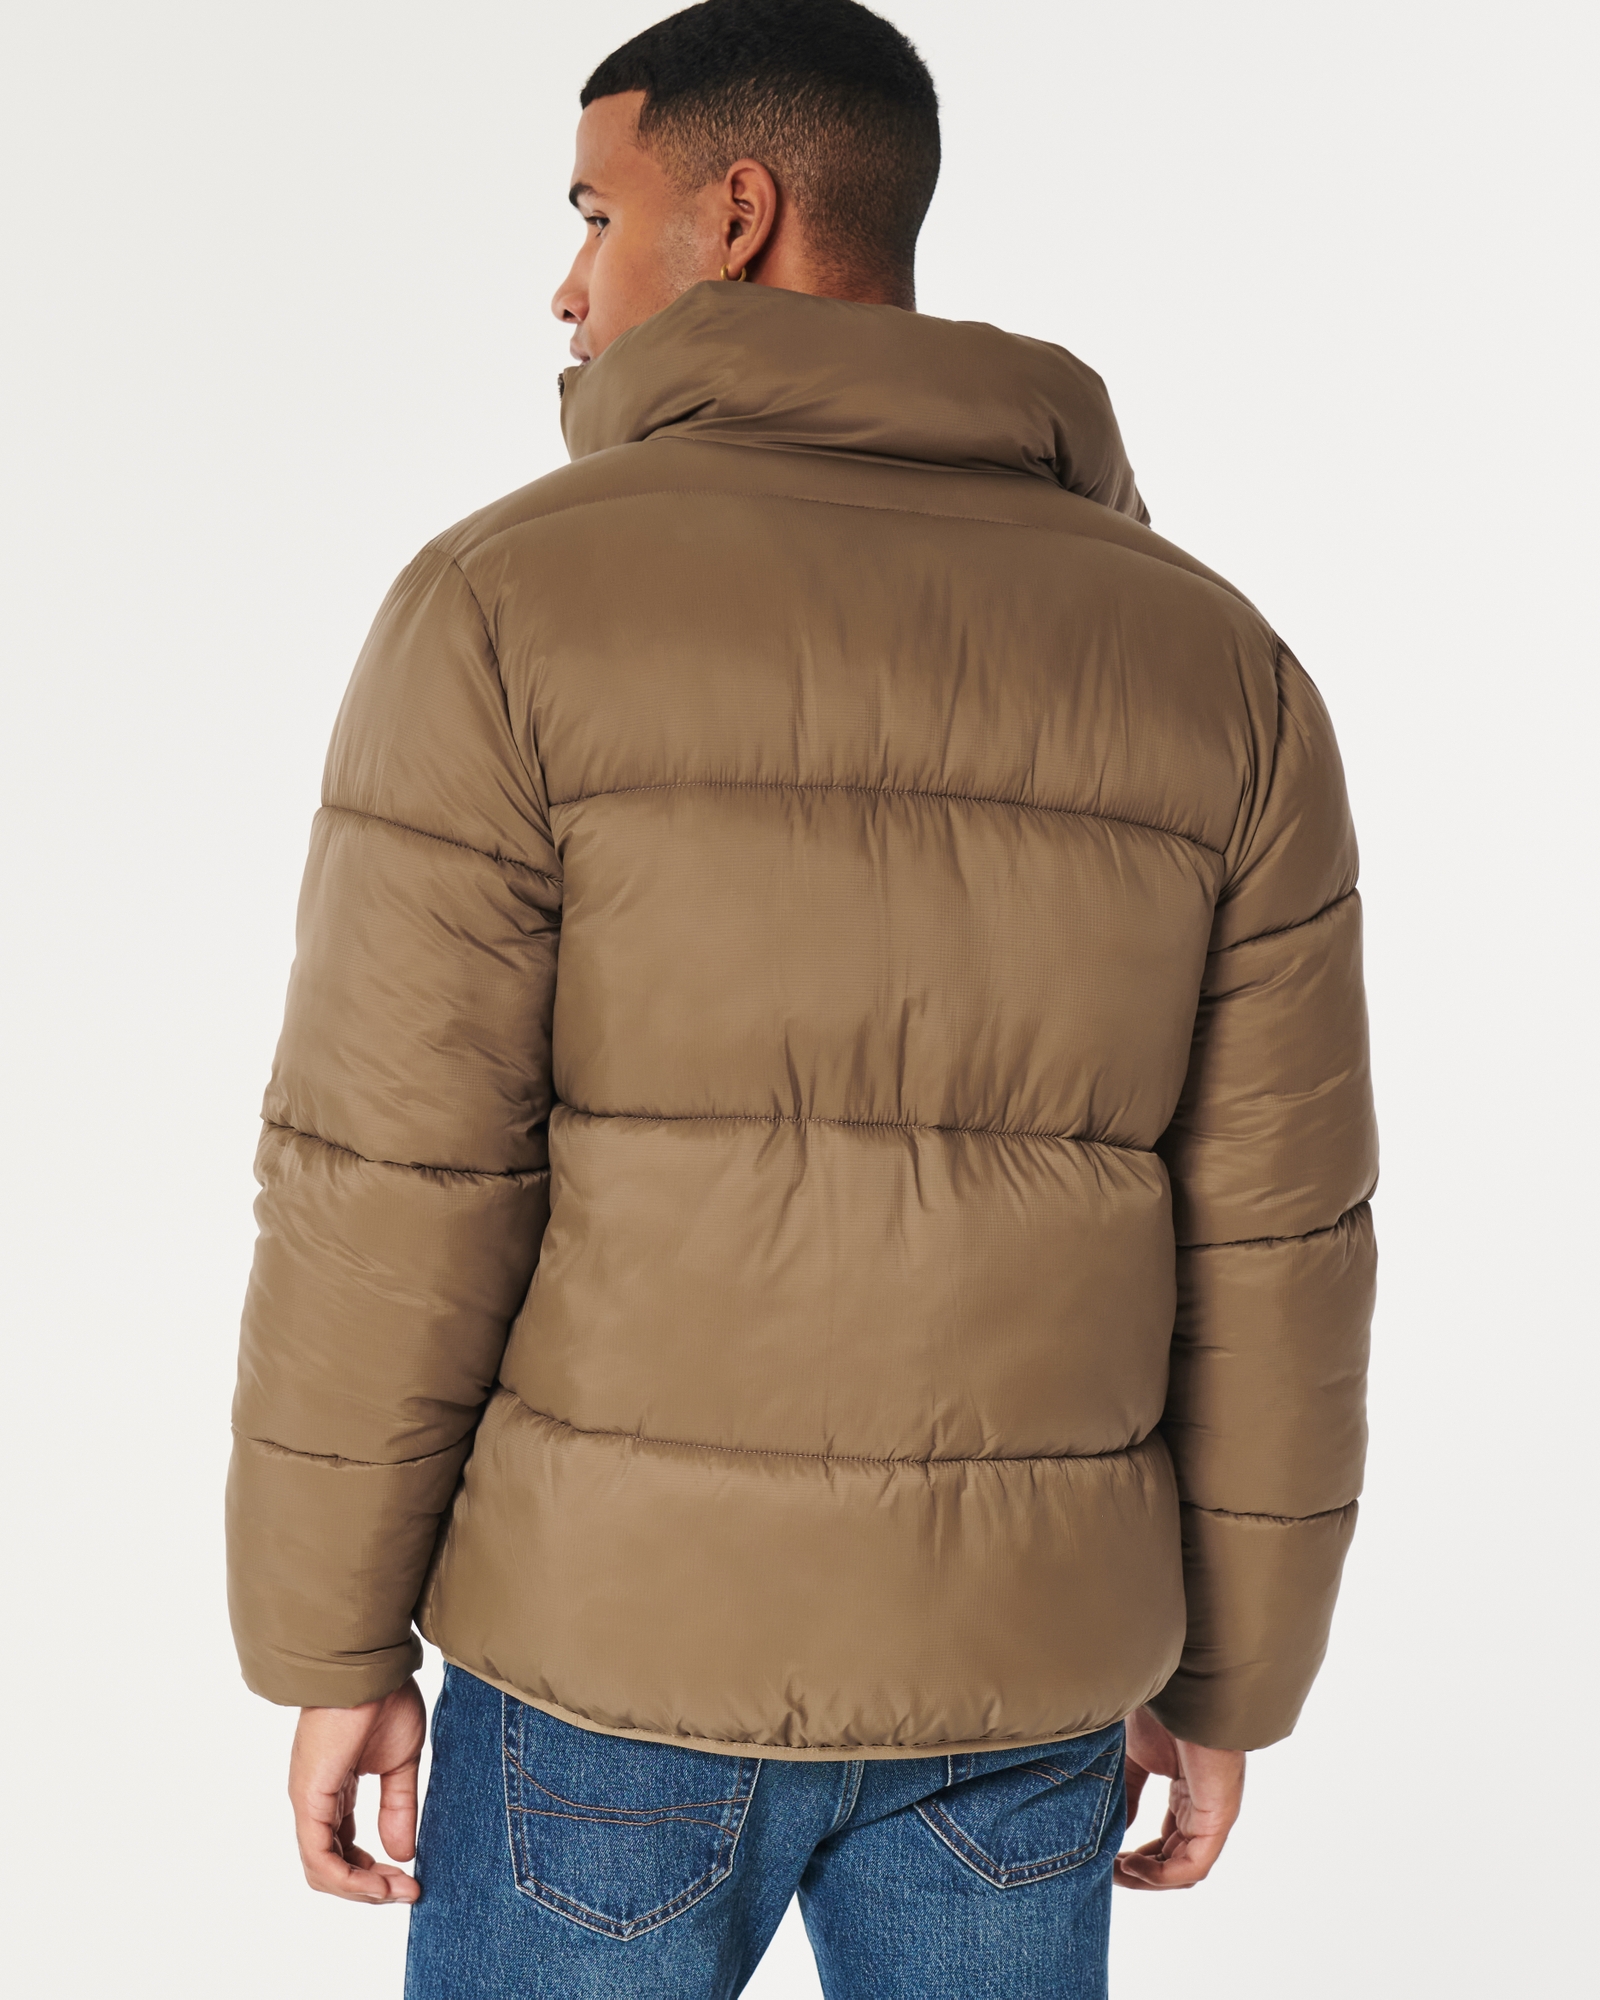 NWT HOLLISTER MEN'S ULTIMATE REVERSIBLE PUFFER JACKET | Sizes L / XL | $120